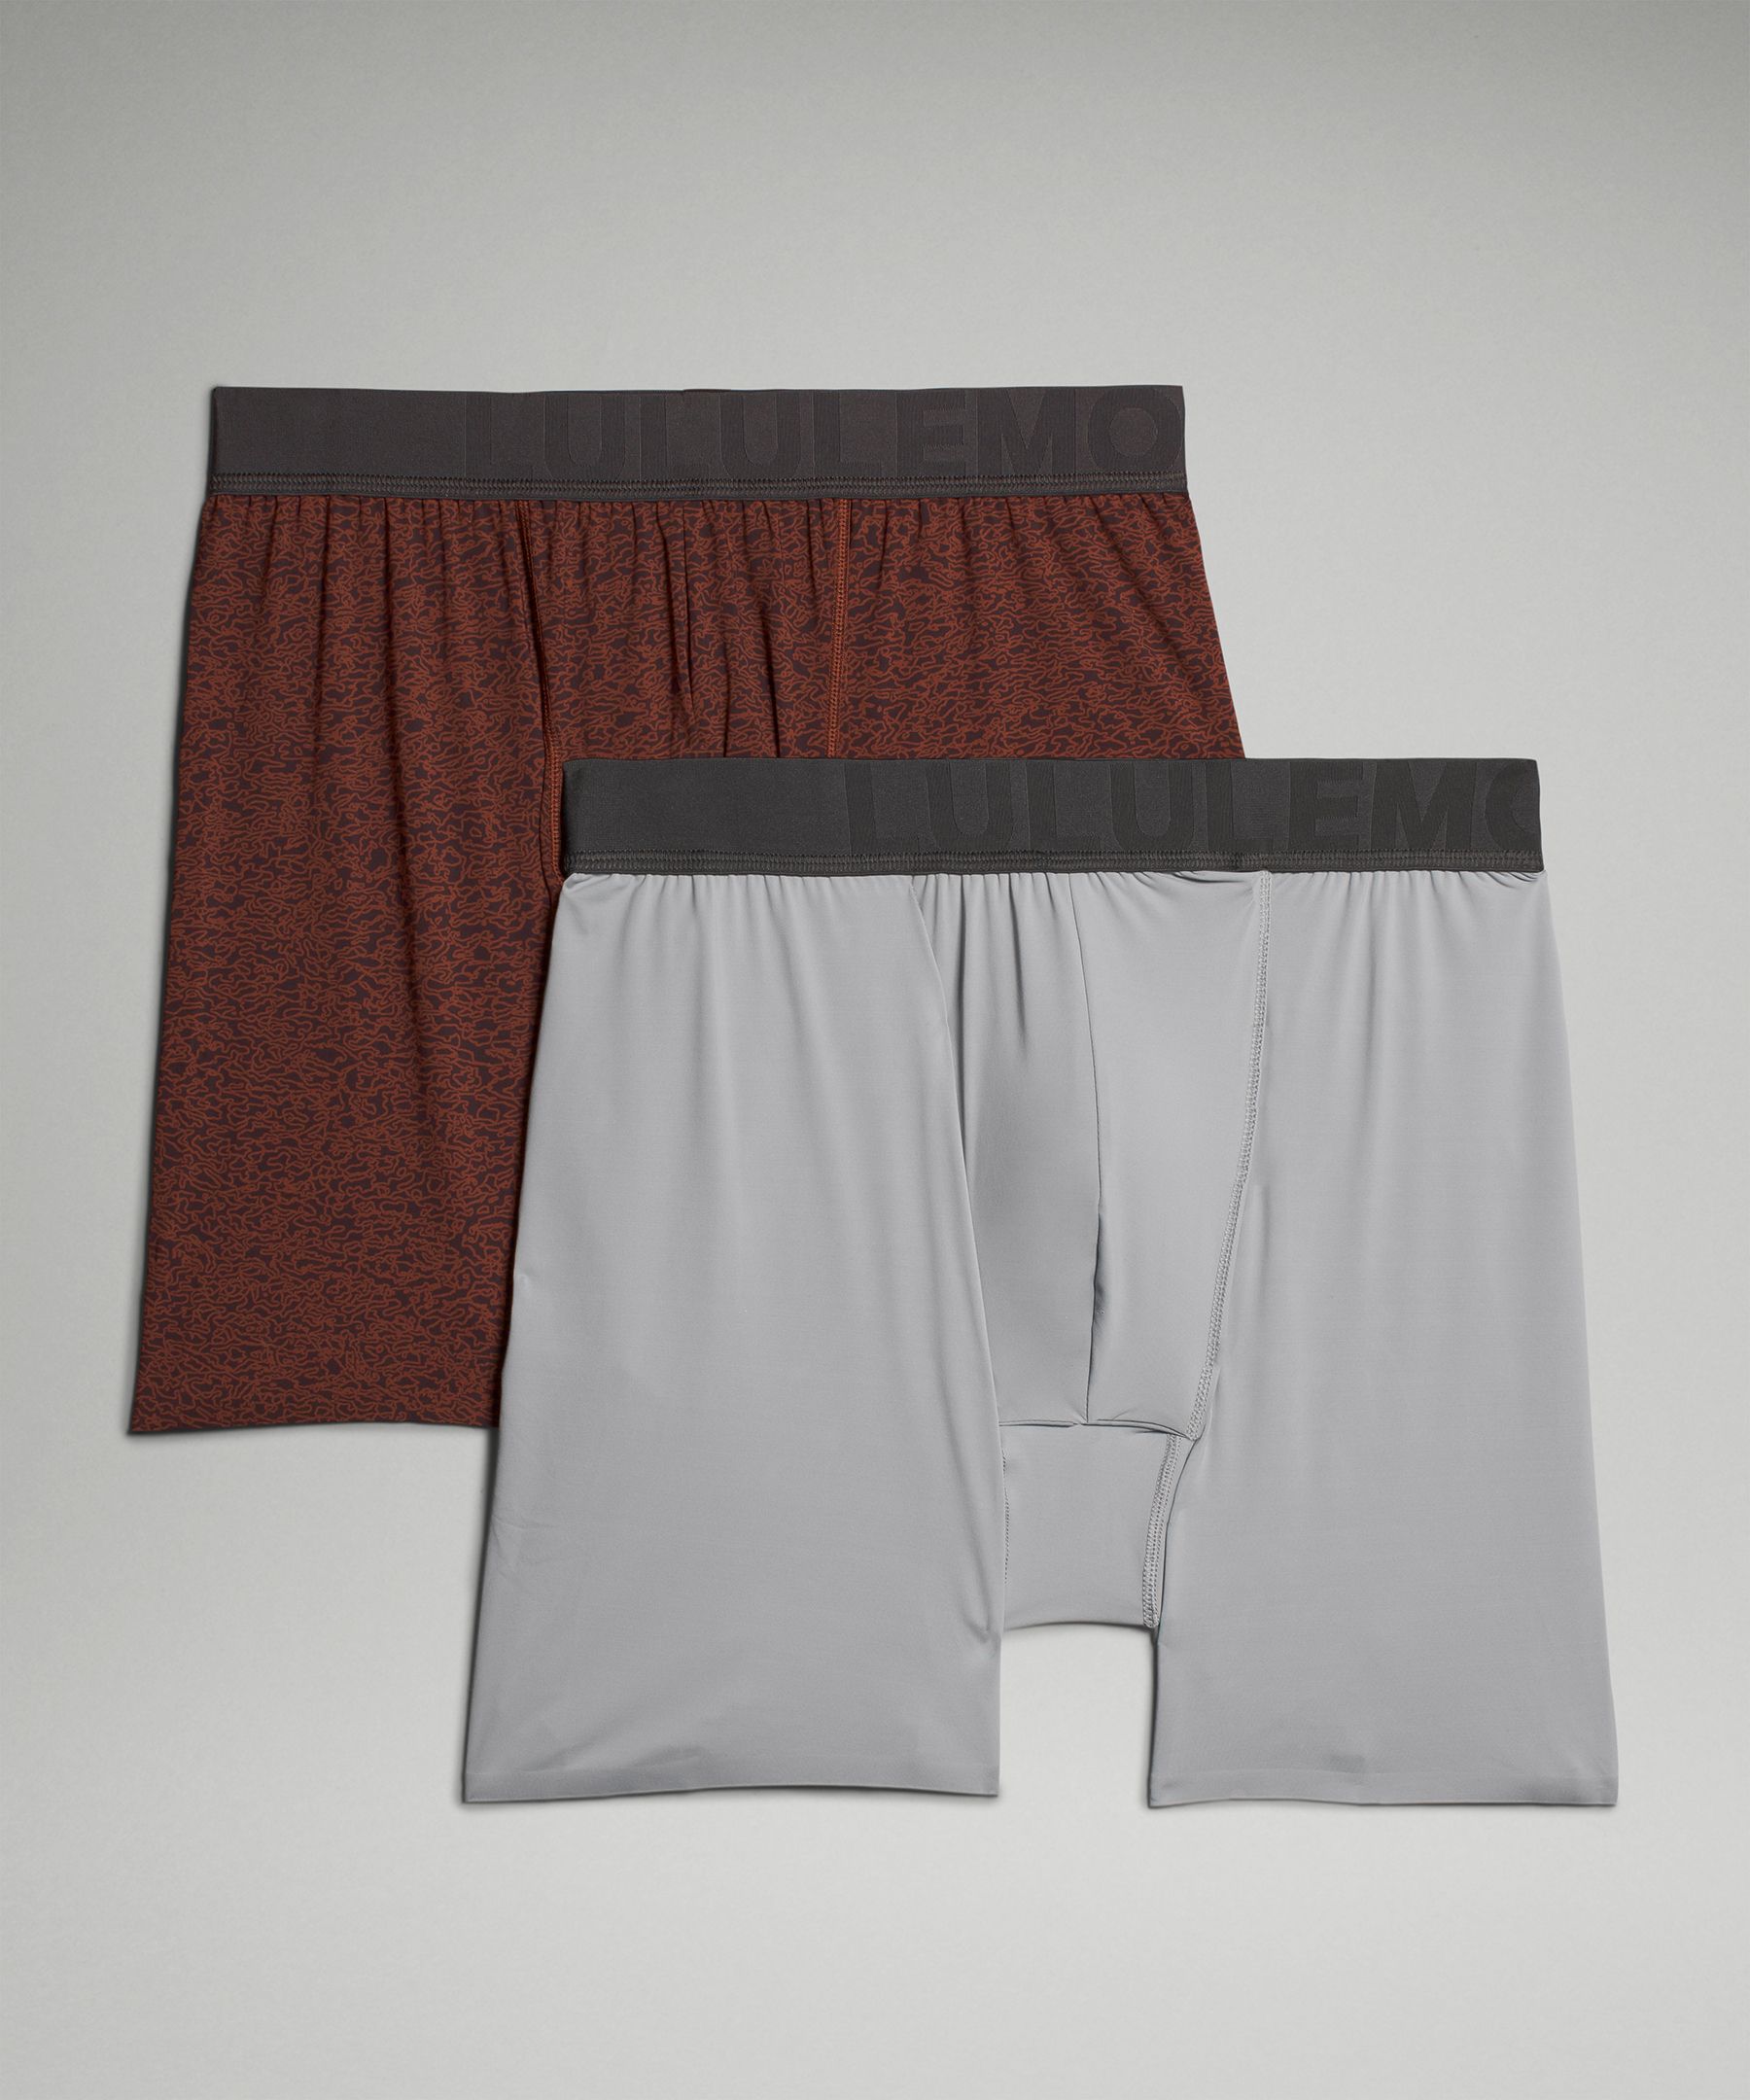 Lululemon Built To Move Boxers 5" 2 Pack